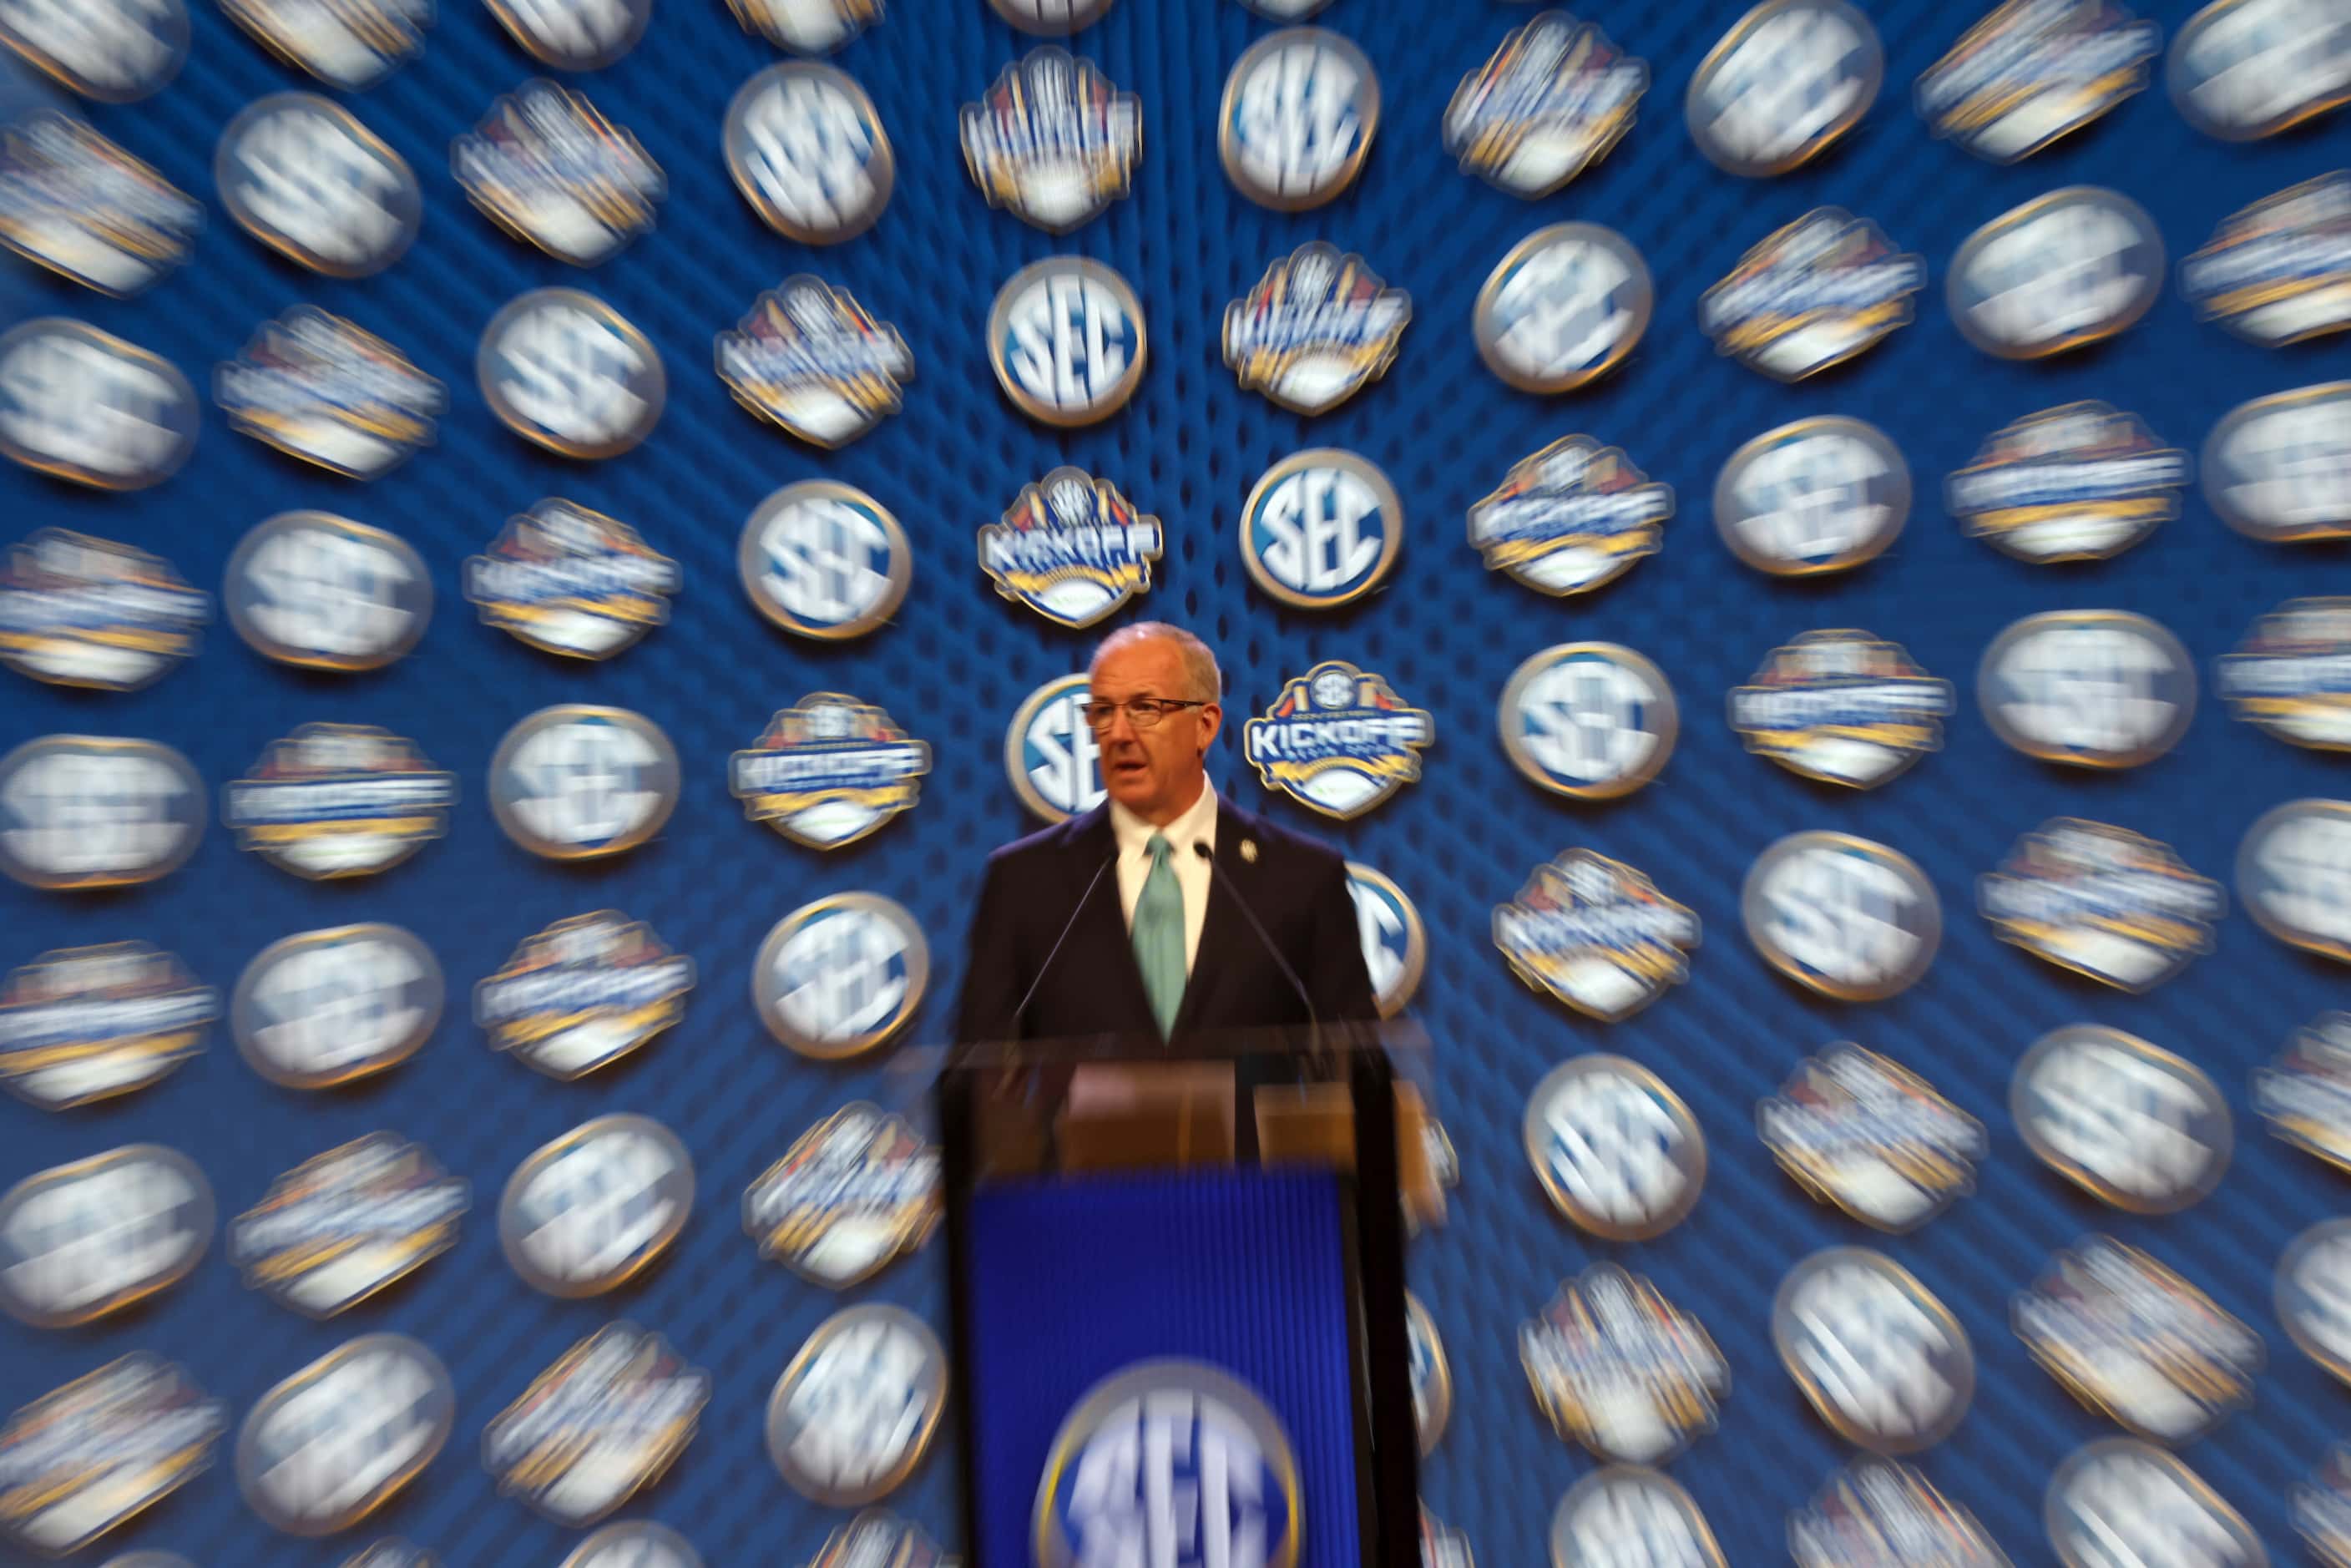 South Eastern Conference Commissioner Greg Sankey delivers a message to explain the current...